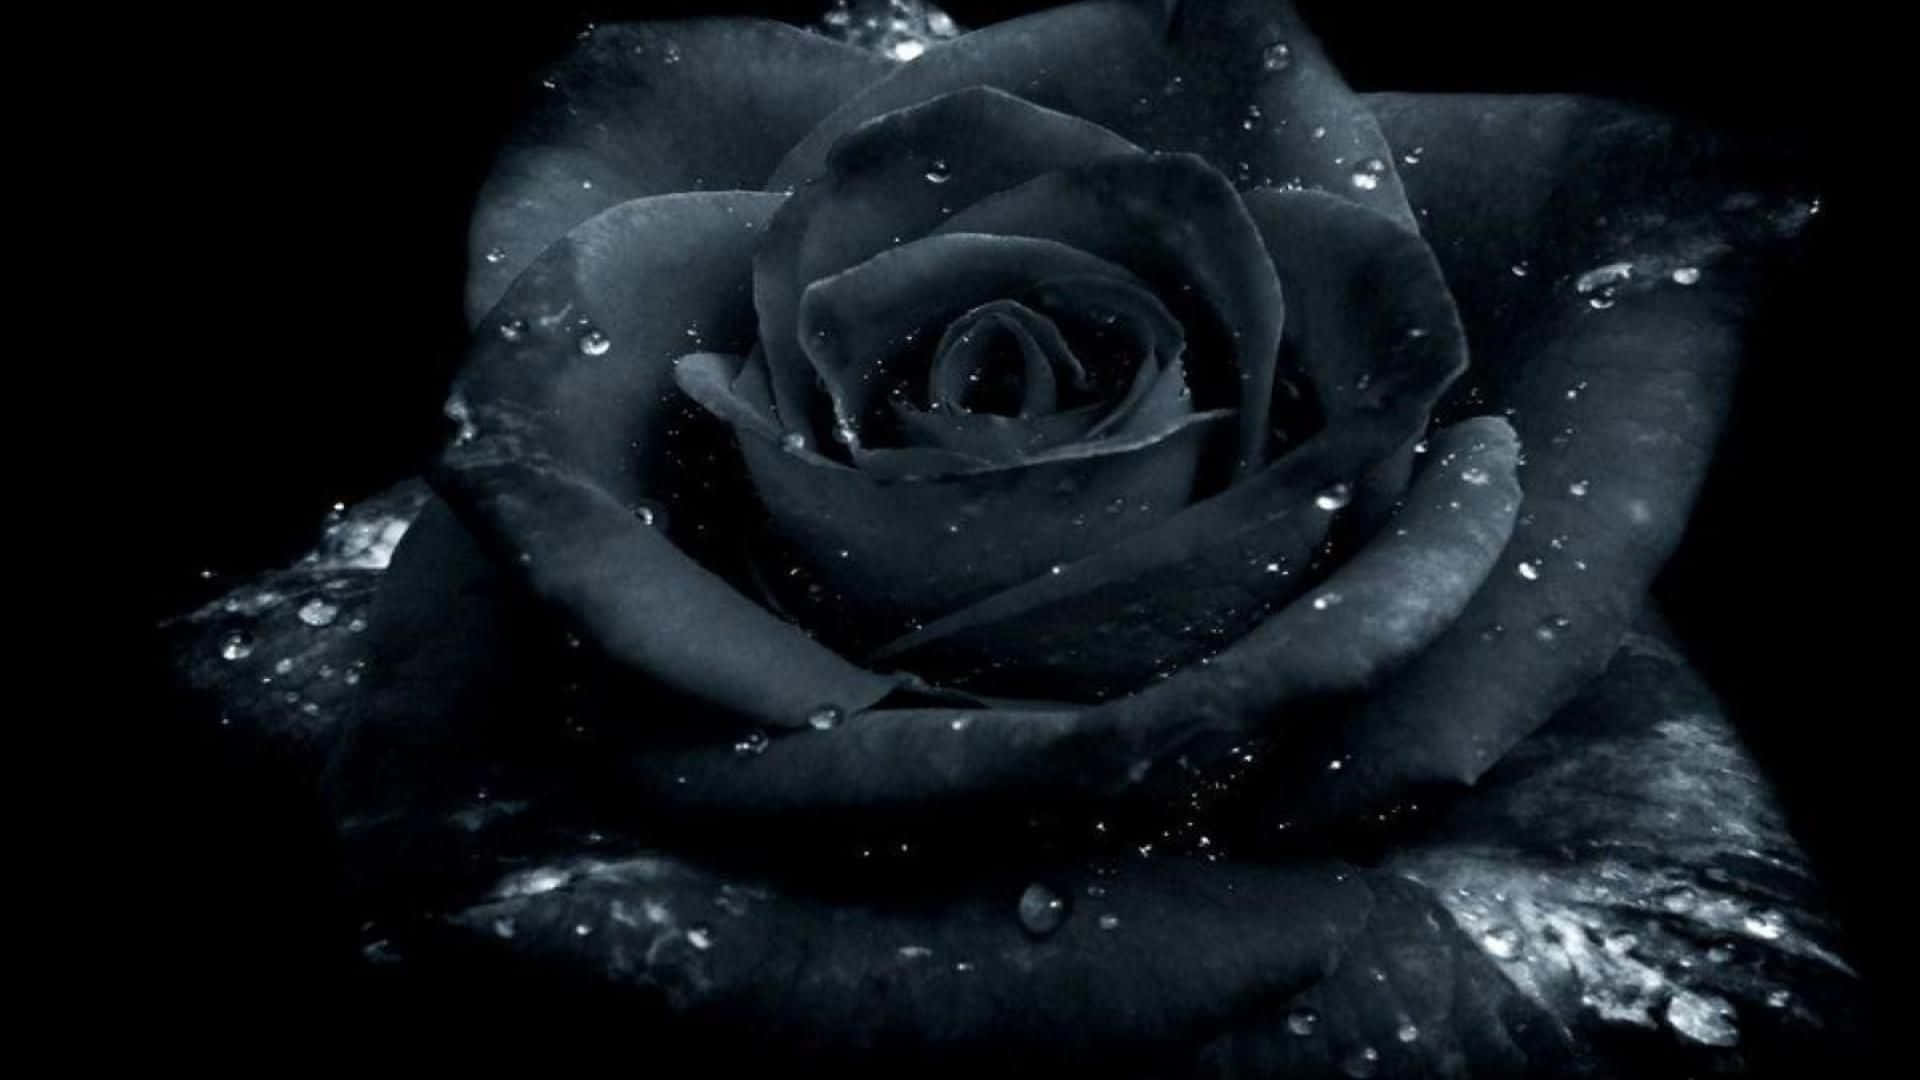 Mysterious Elegance of a Black Rose